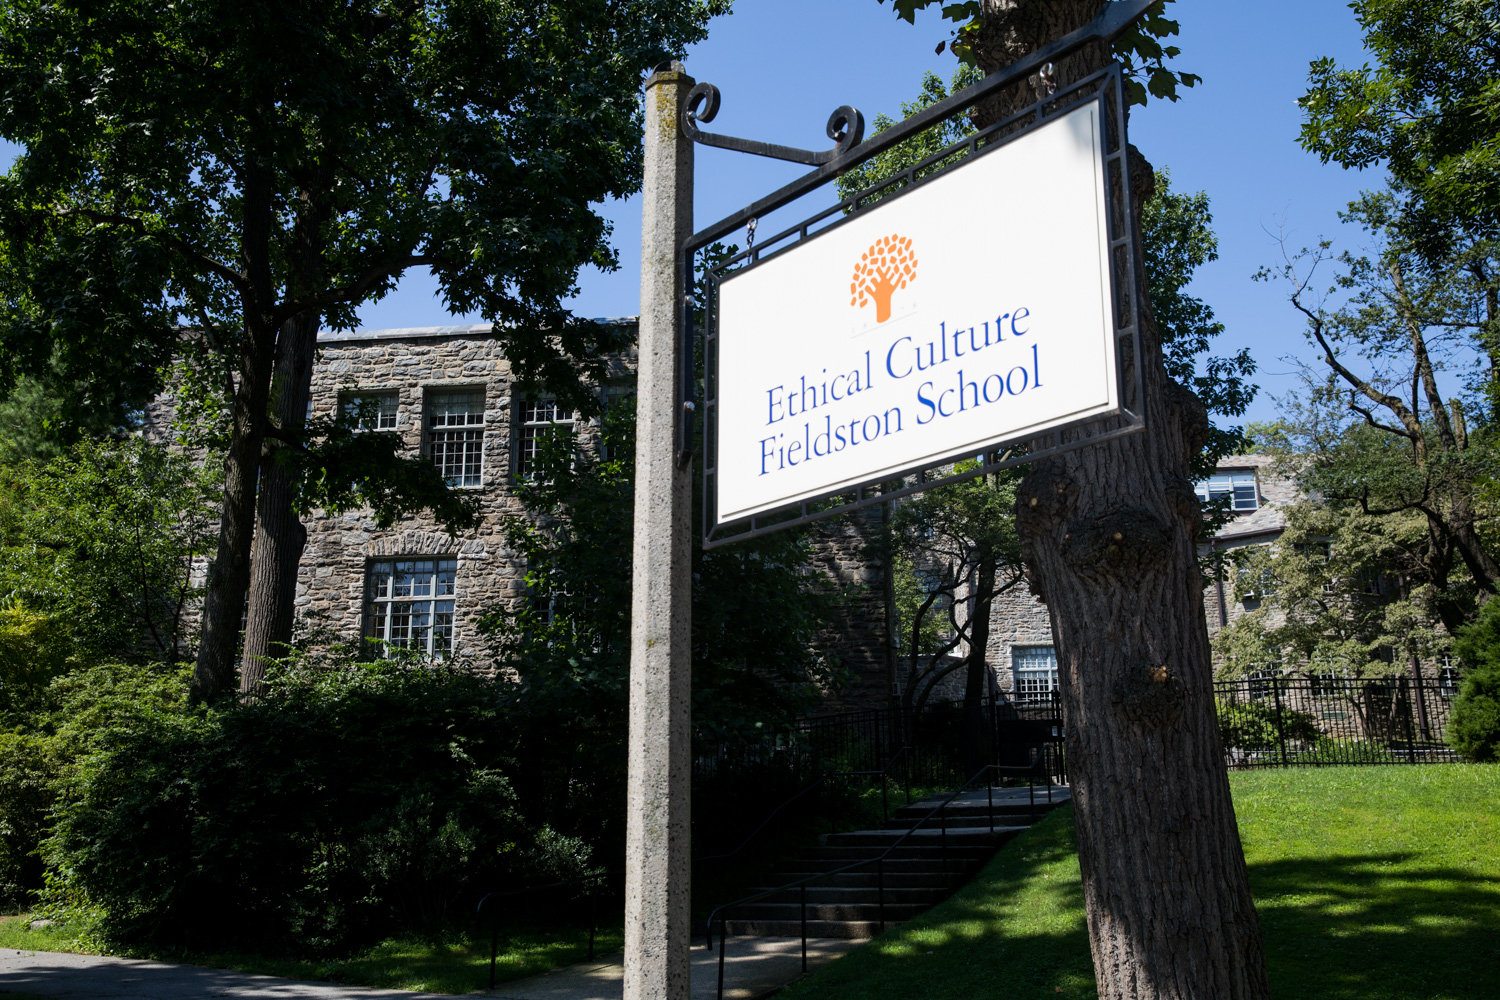 A teacher at Ethical Culture Fieldston School was fired last week after tweeting in support of recent speaker A. Kayum Ahmed, who made comments at the school late last year that some described as anti-Semitic.